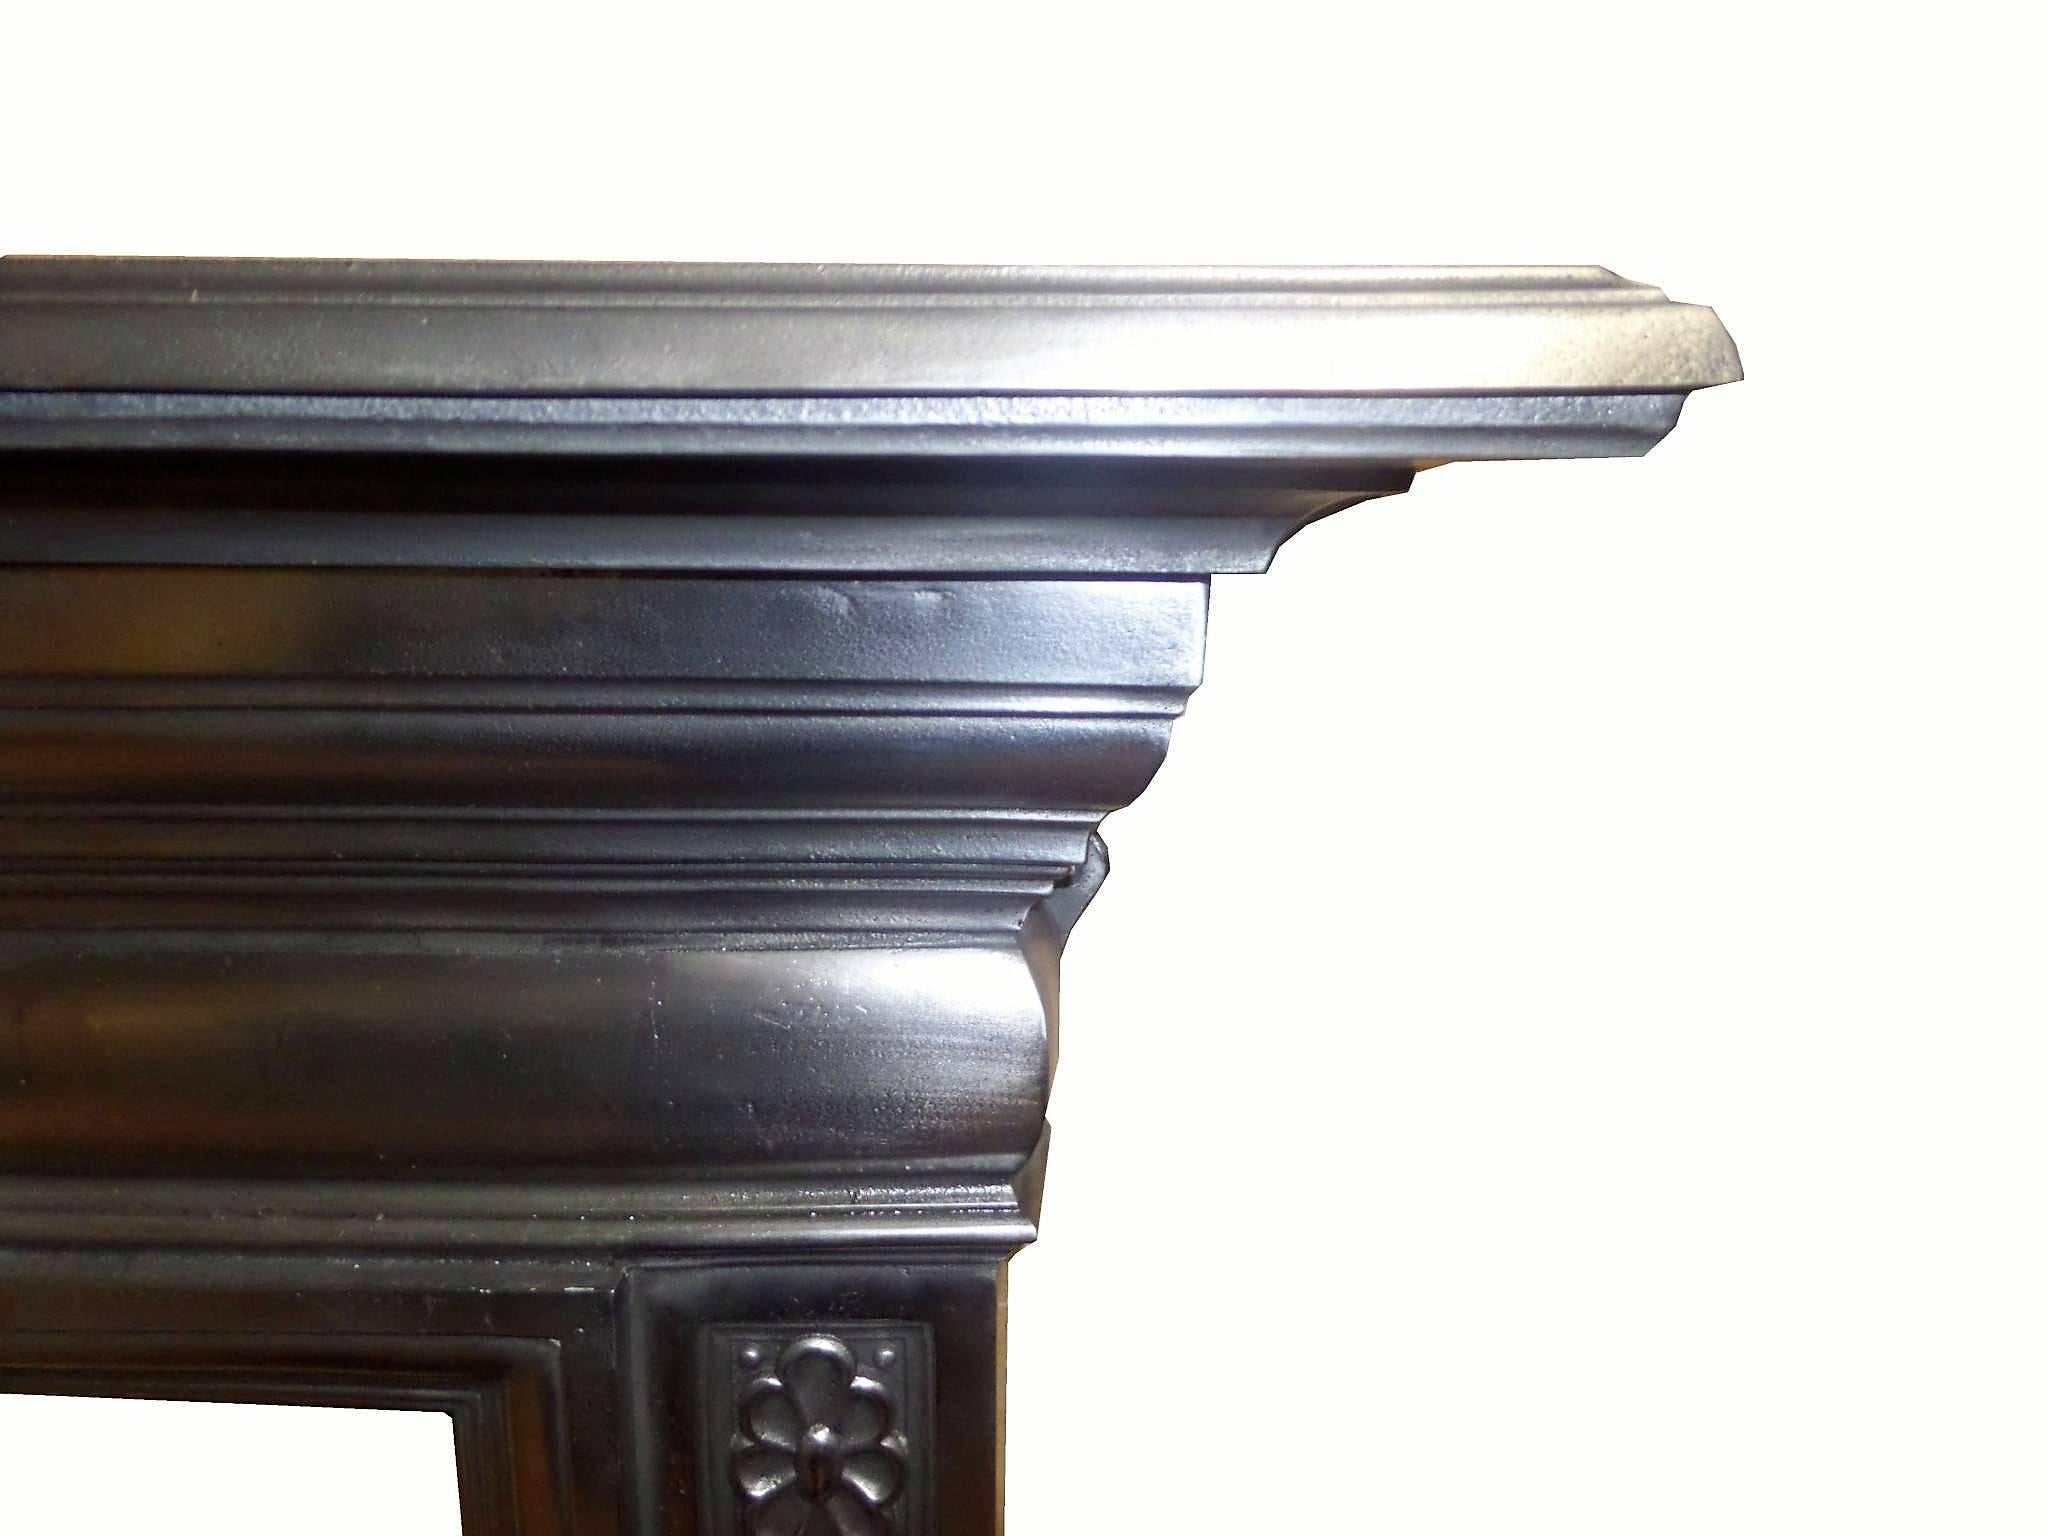 Antique restored burnished (semi-polished) cast iron surround. Delicate casting detail. Shown with two complete fireplace examples, circa 1901.